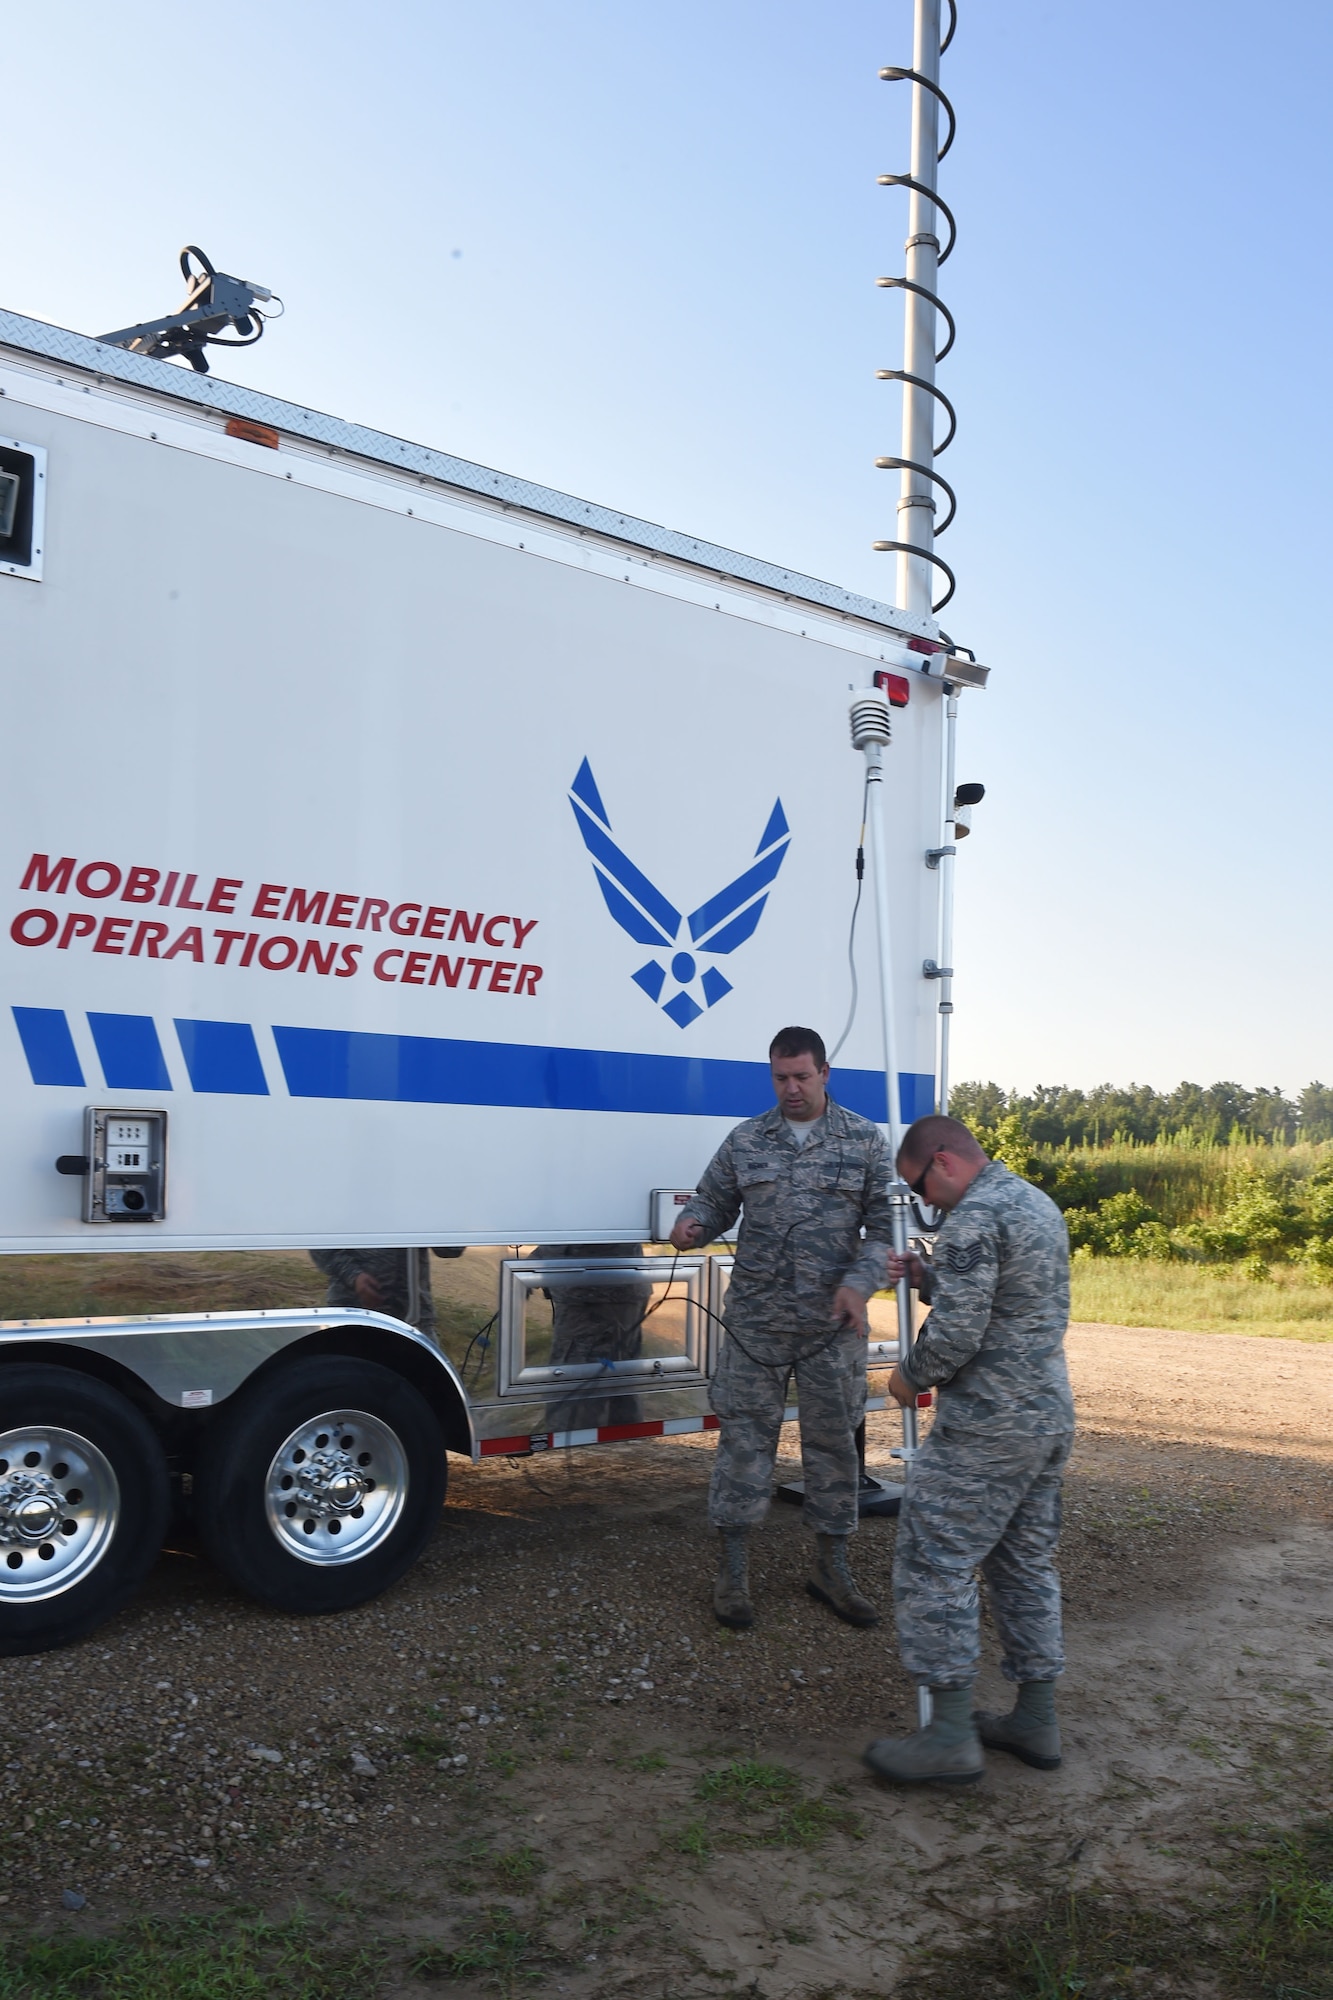 Tech. Sgt. Joeseph Stickel, a Cyber Transportation technician, and Master Sgt. Brad Kuennen, a Radio Frequency Transmissions Systems technician, place the weather station for the 132d Wing's Mobile Emergency Operations Center (MEOC) on July 19, 2017 at Fort McCoy, Wis. The weather station provides numbers for wind direction and temperature, among other things, so that Stickel and Kuennen can monitor weather conditions in support of PATRIOT North 2017. (Air National Guard photo by A1C Katelyn Sprott)